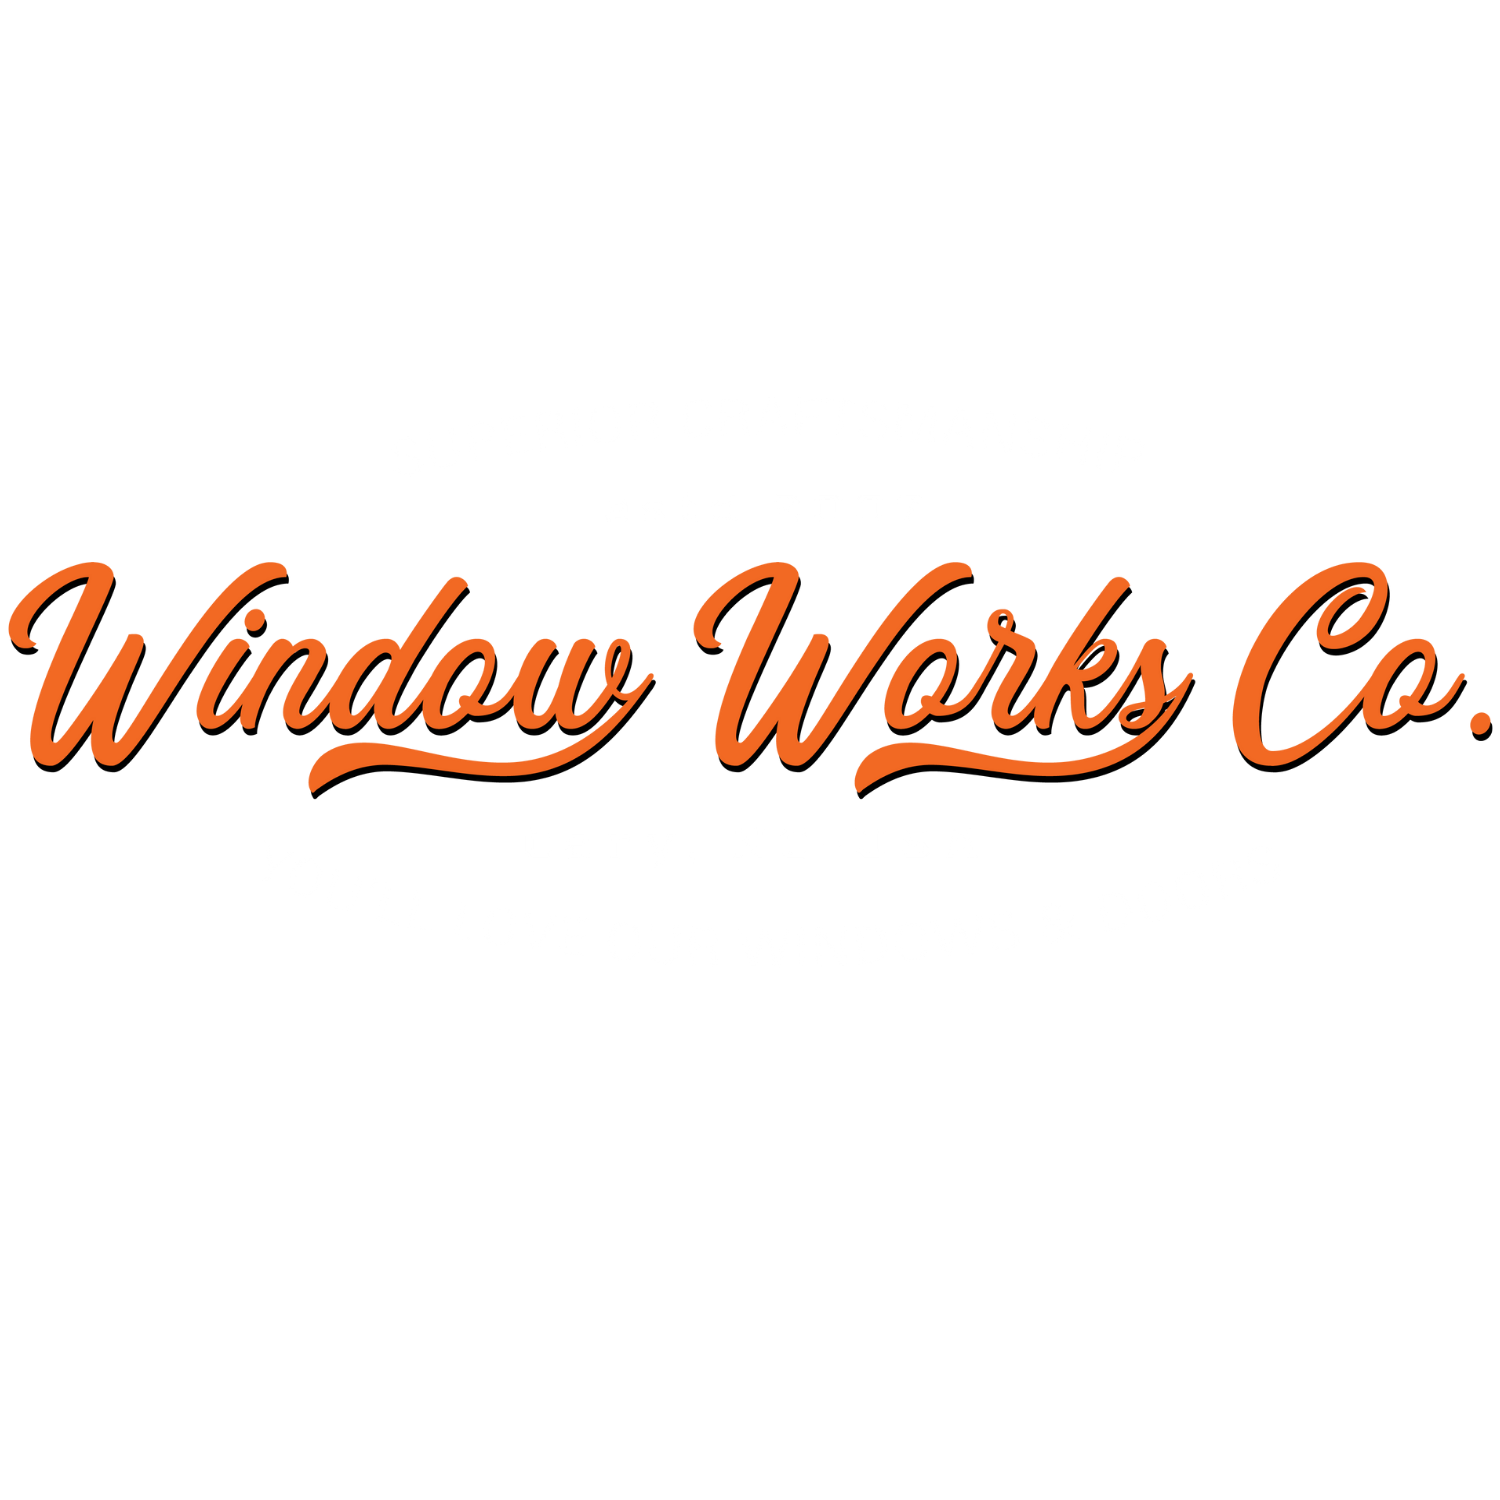 Logo for the Window Works Company based in Cary, NC. Orange and white text reads "Superior craftsmanship, Est. 2007, Window Works Co., Cary, NC - USA, You'll love our windows and doors"